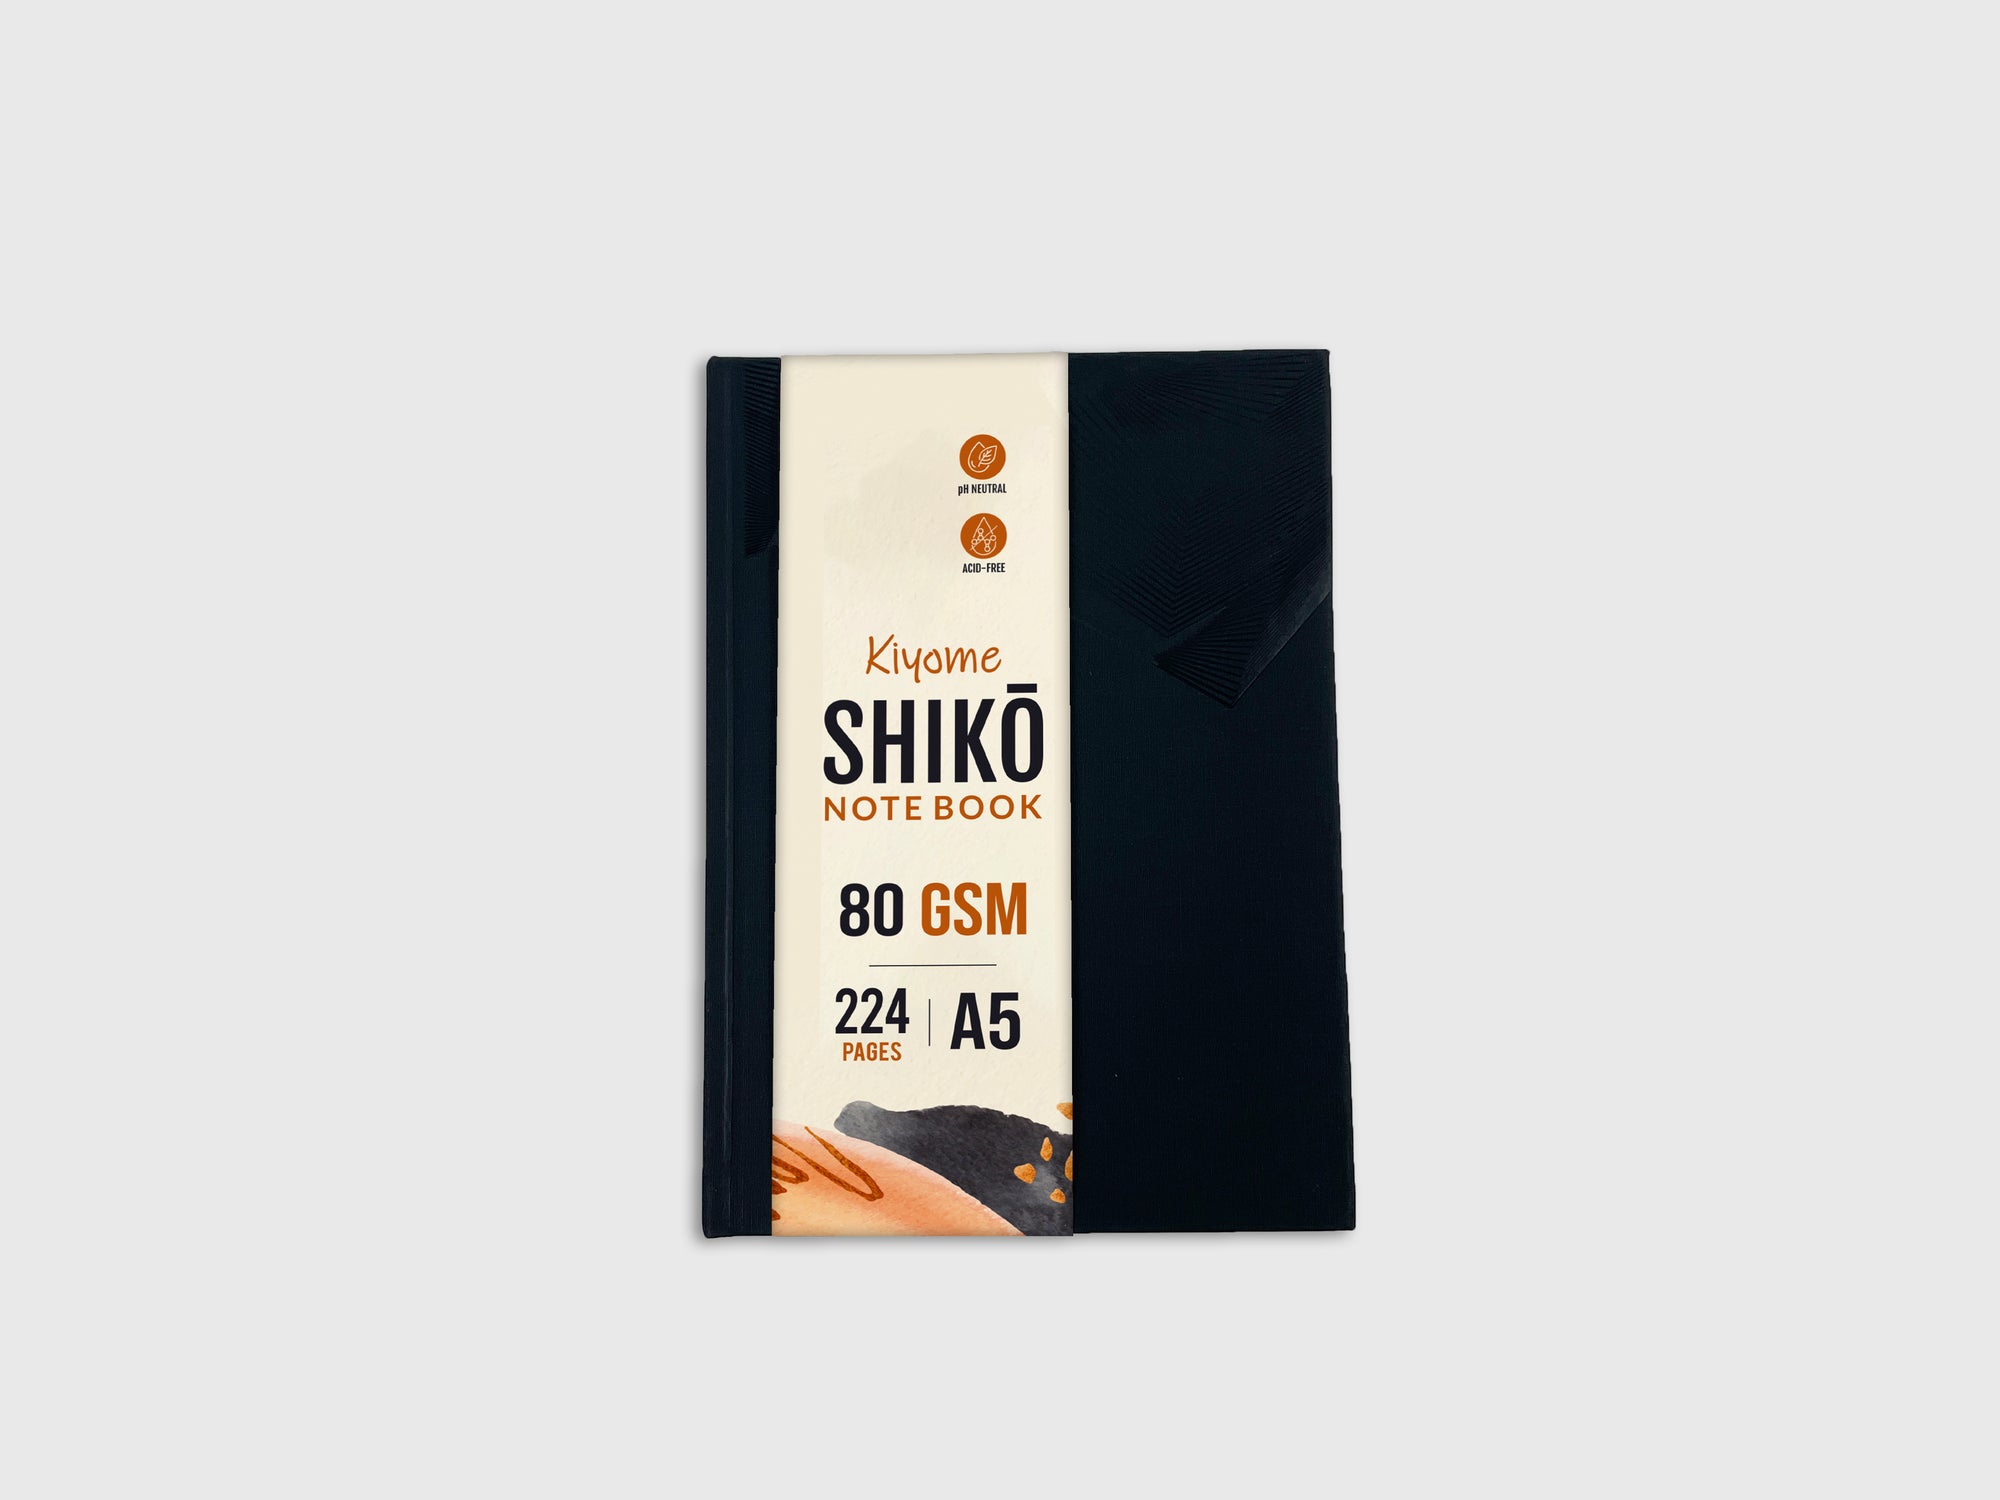 Kiyome SHIKO Notebook | Linen Textured Cover | 80 GSM | A5 | 224 Ruled Pages